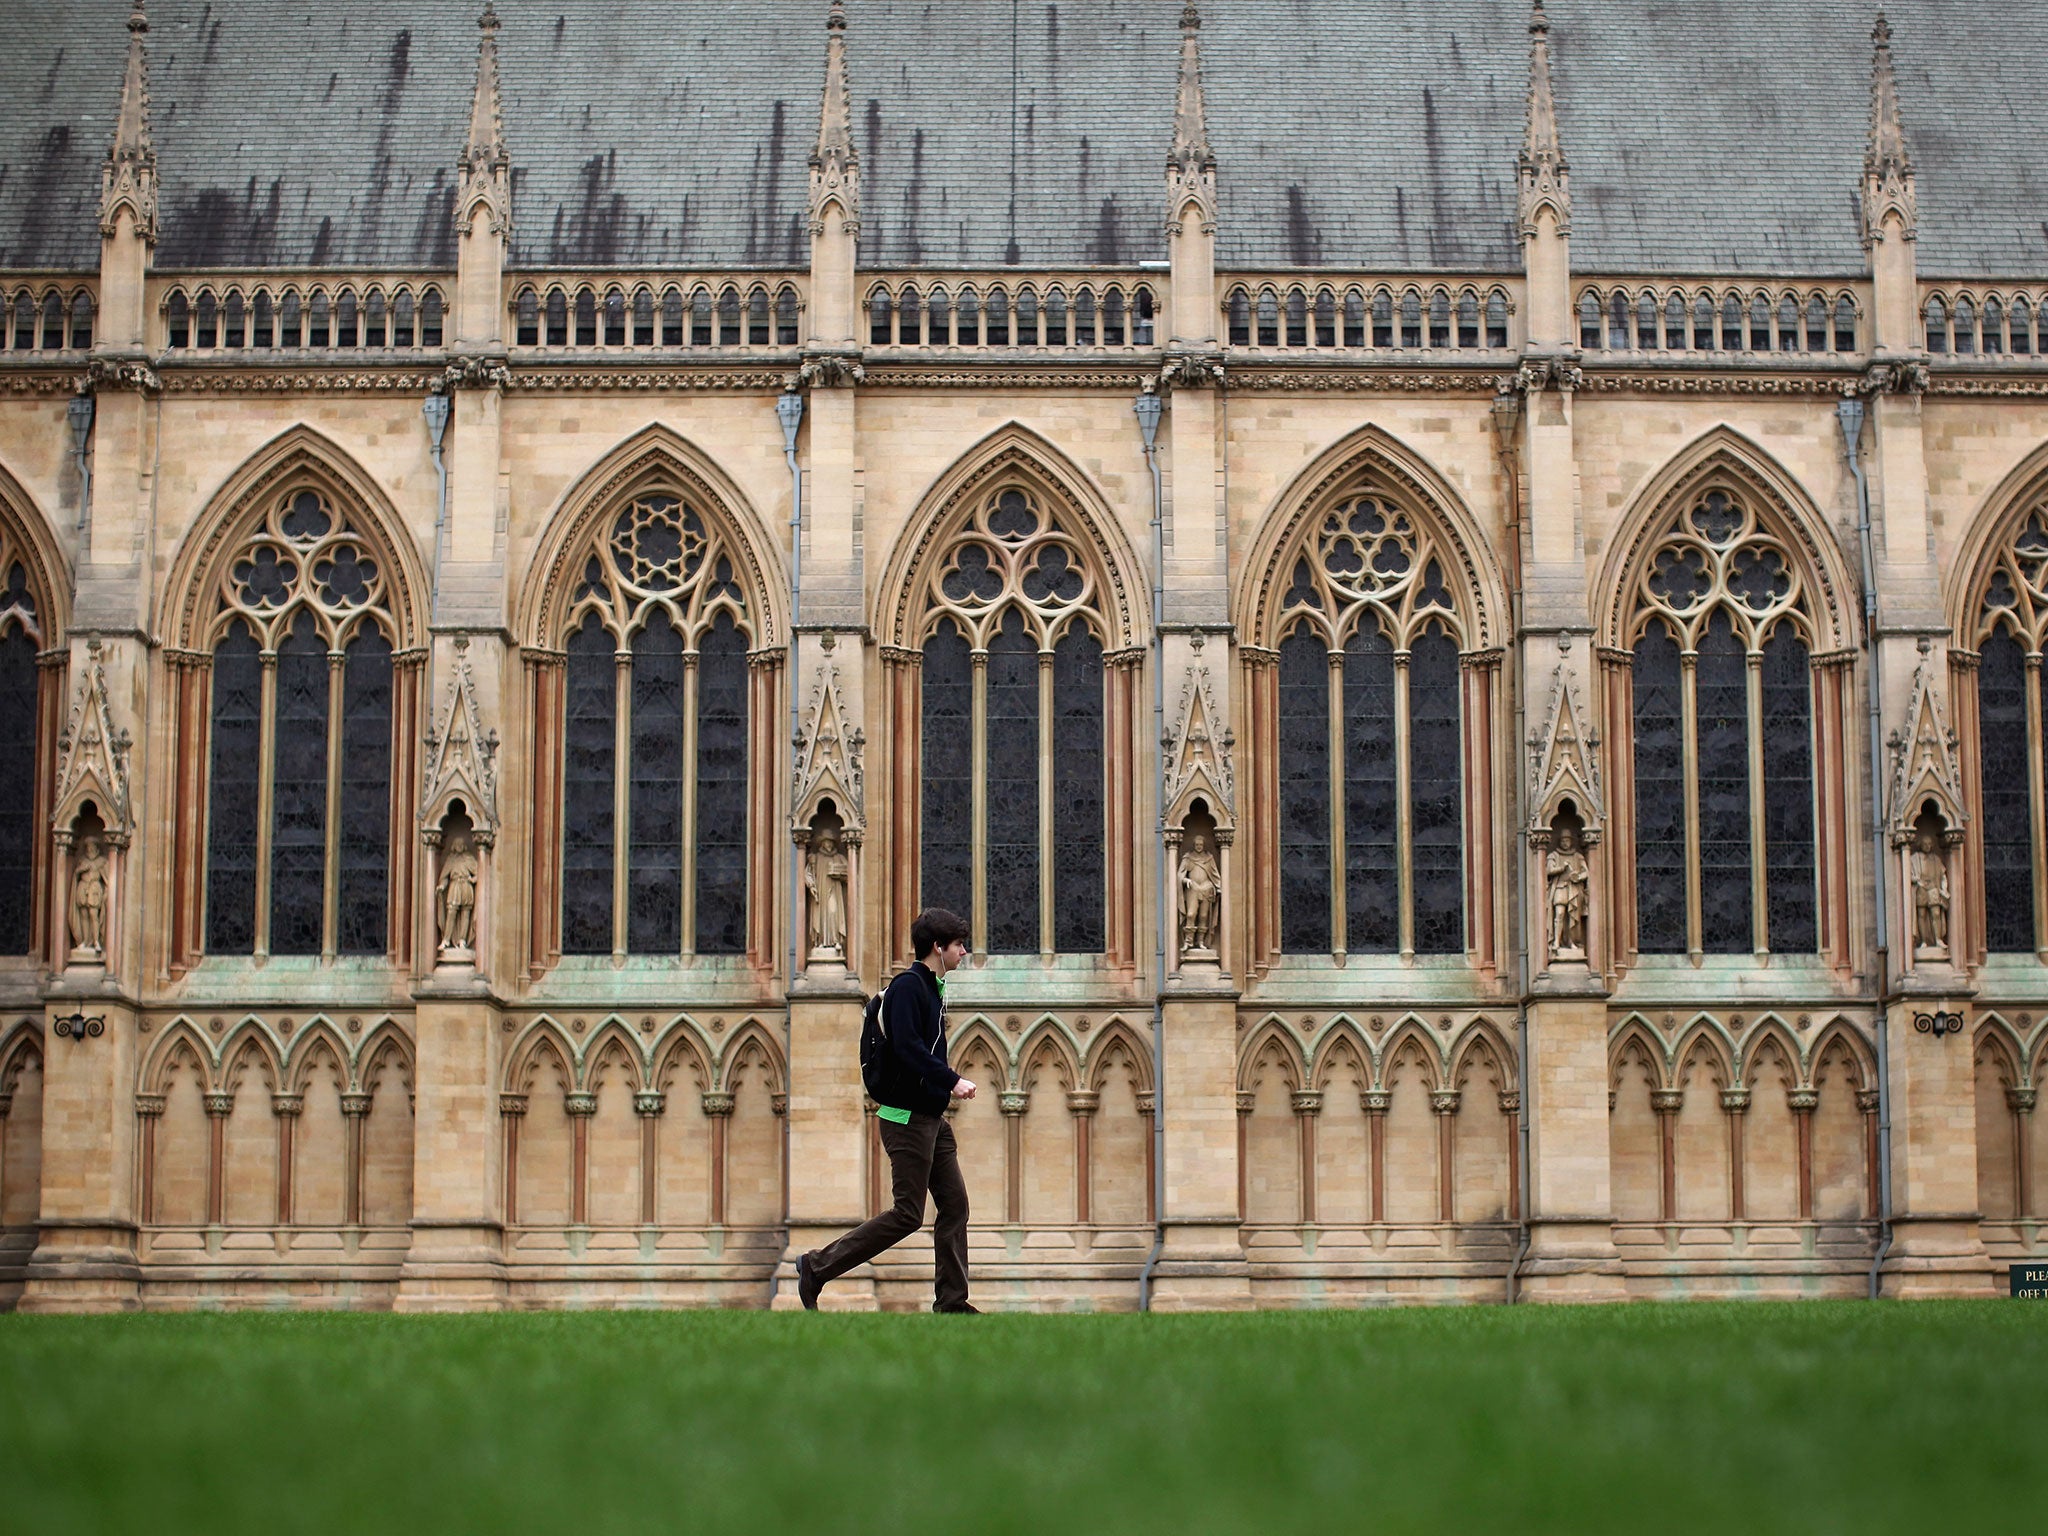 St John's College, Cambridge. Around 400 of the most “highly able” 11- to 14-year-olds at non-selective state schools will be chosen to attend regular academic seminars at four of the country’s most in-demand universities including Cambridge